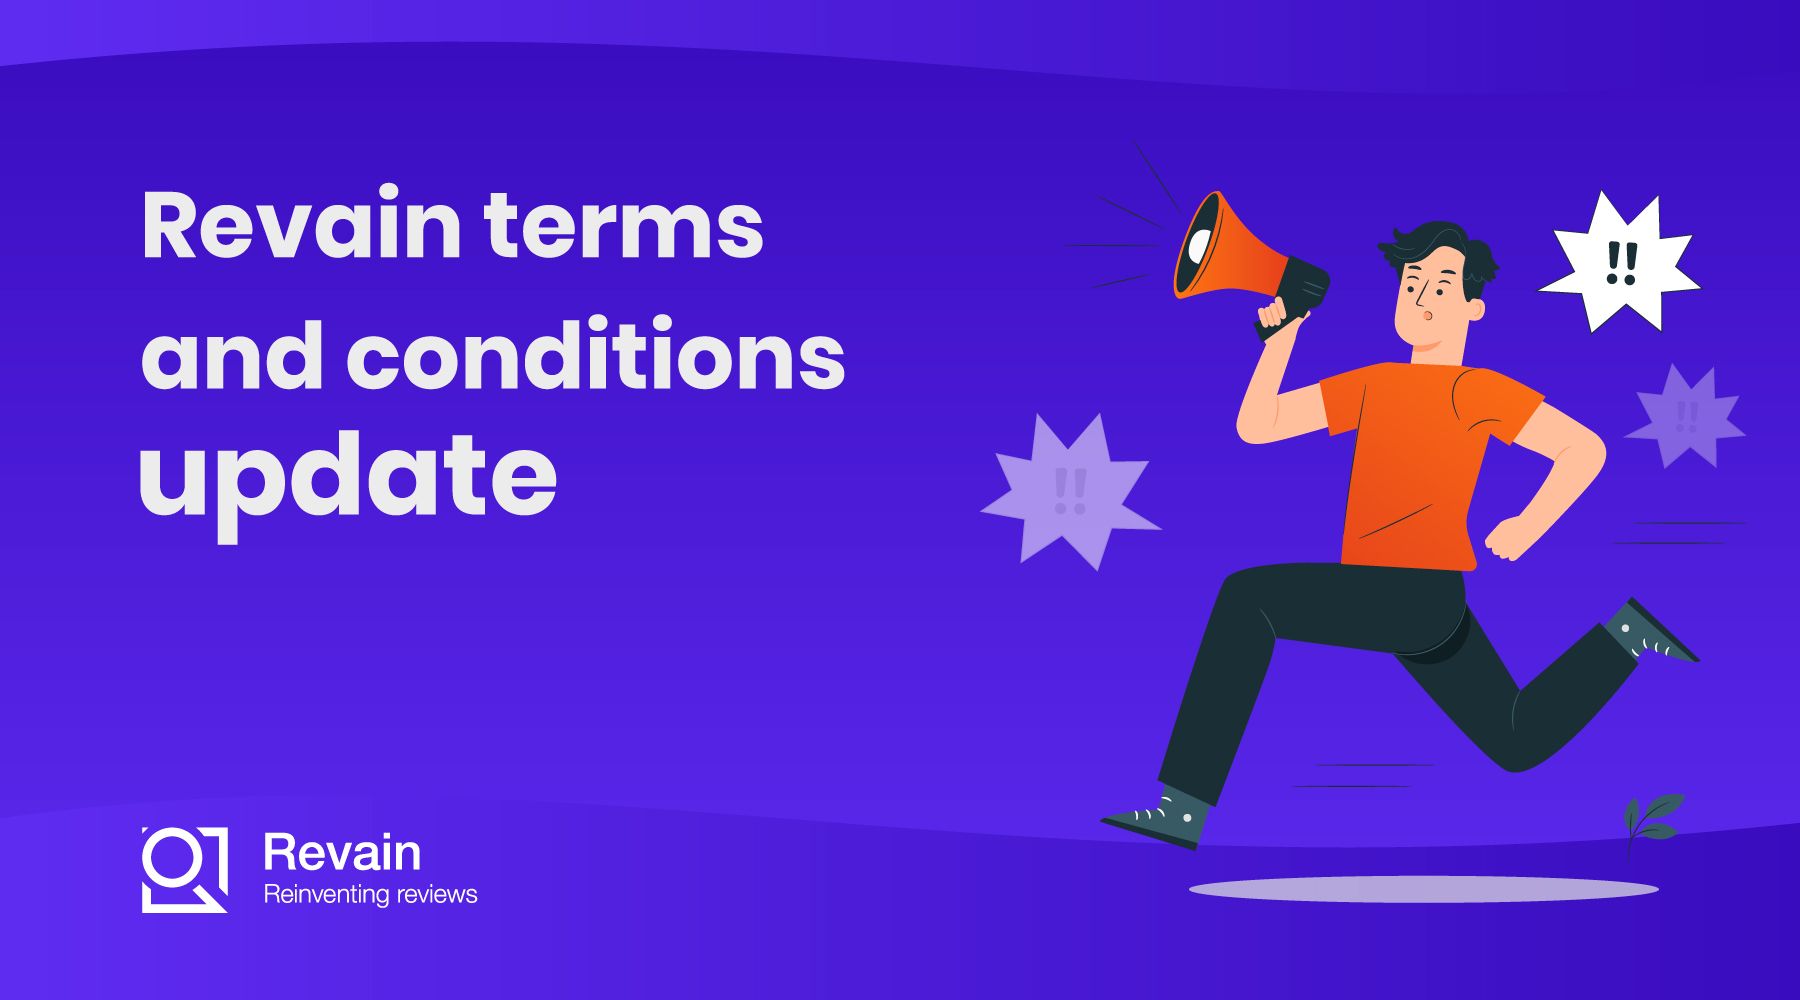 Revain terms and conditions update. 